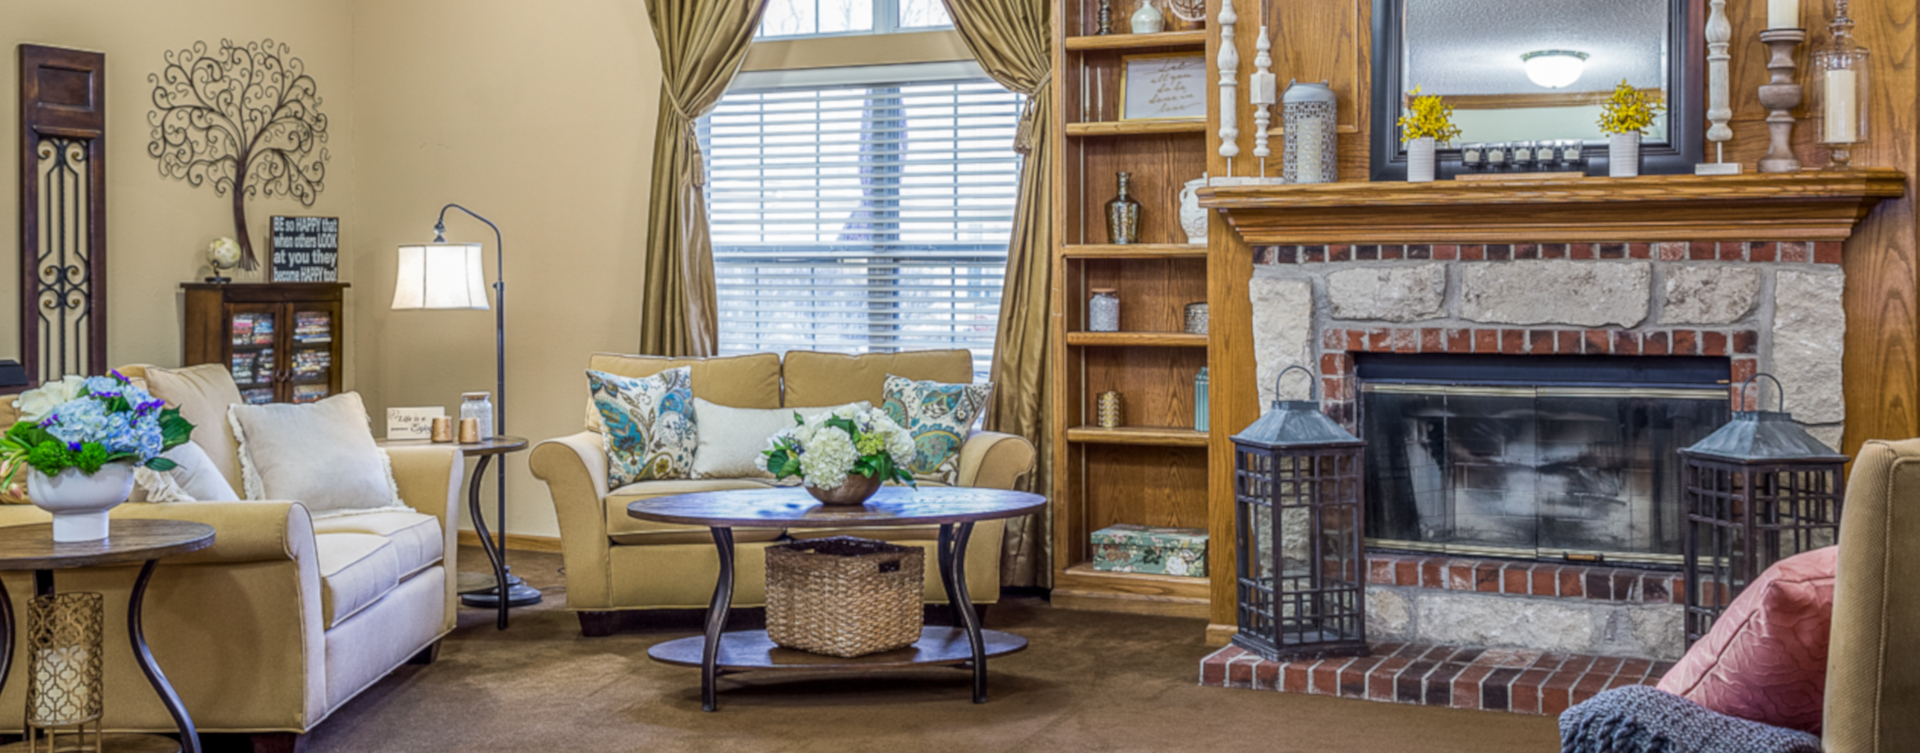 Enjoy a good book in the living room at Bickford of Urbandale